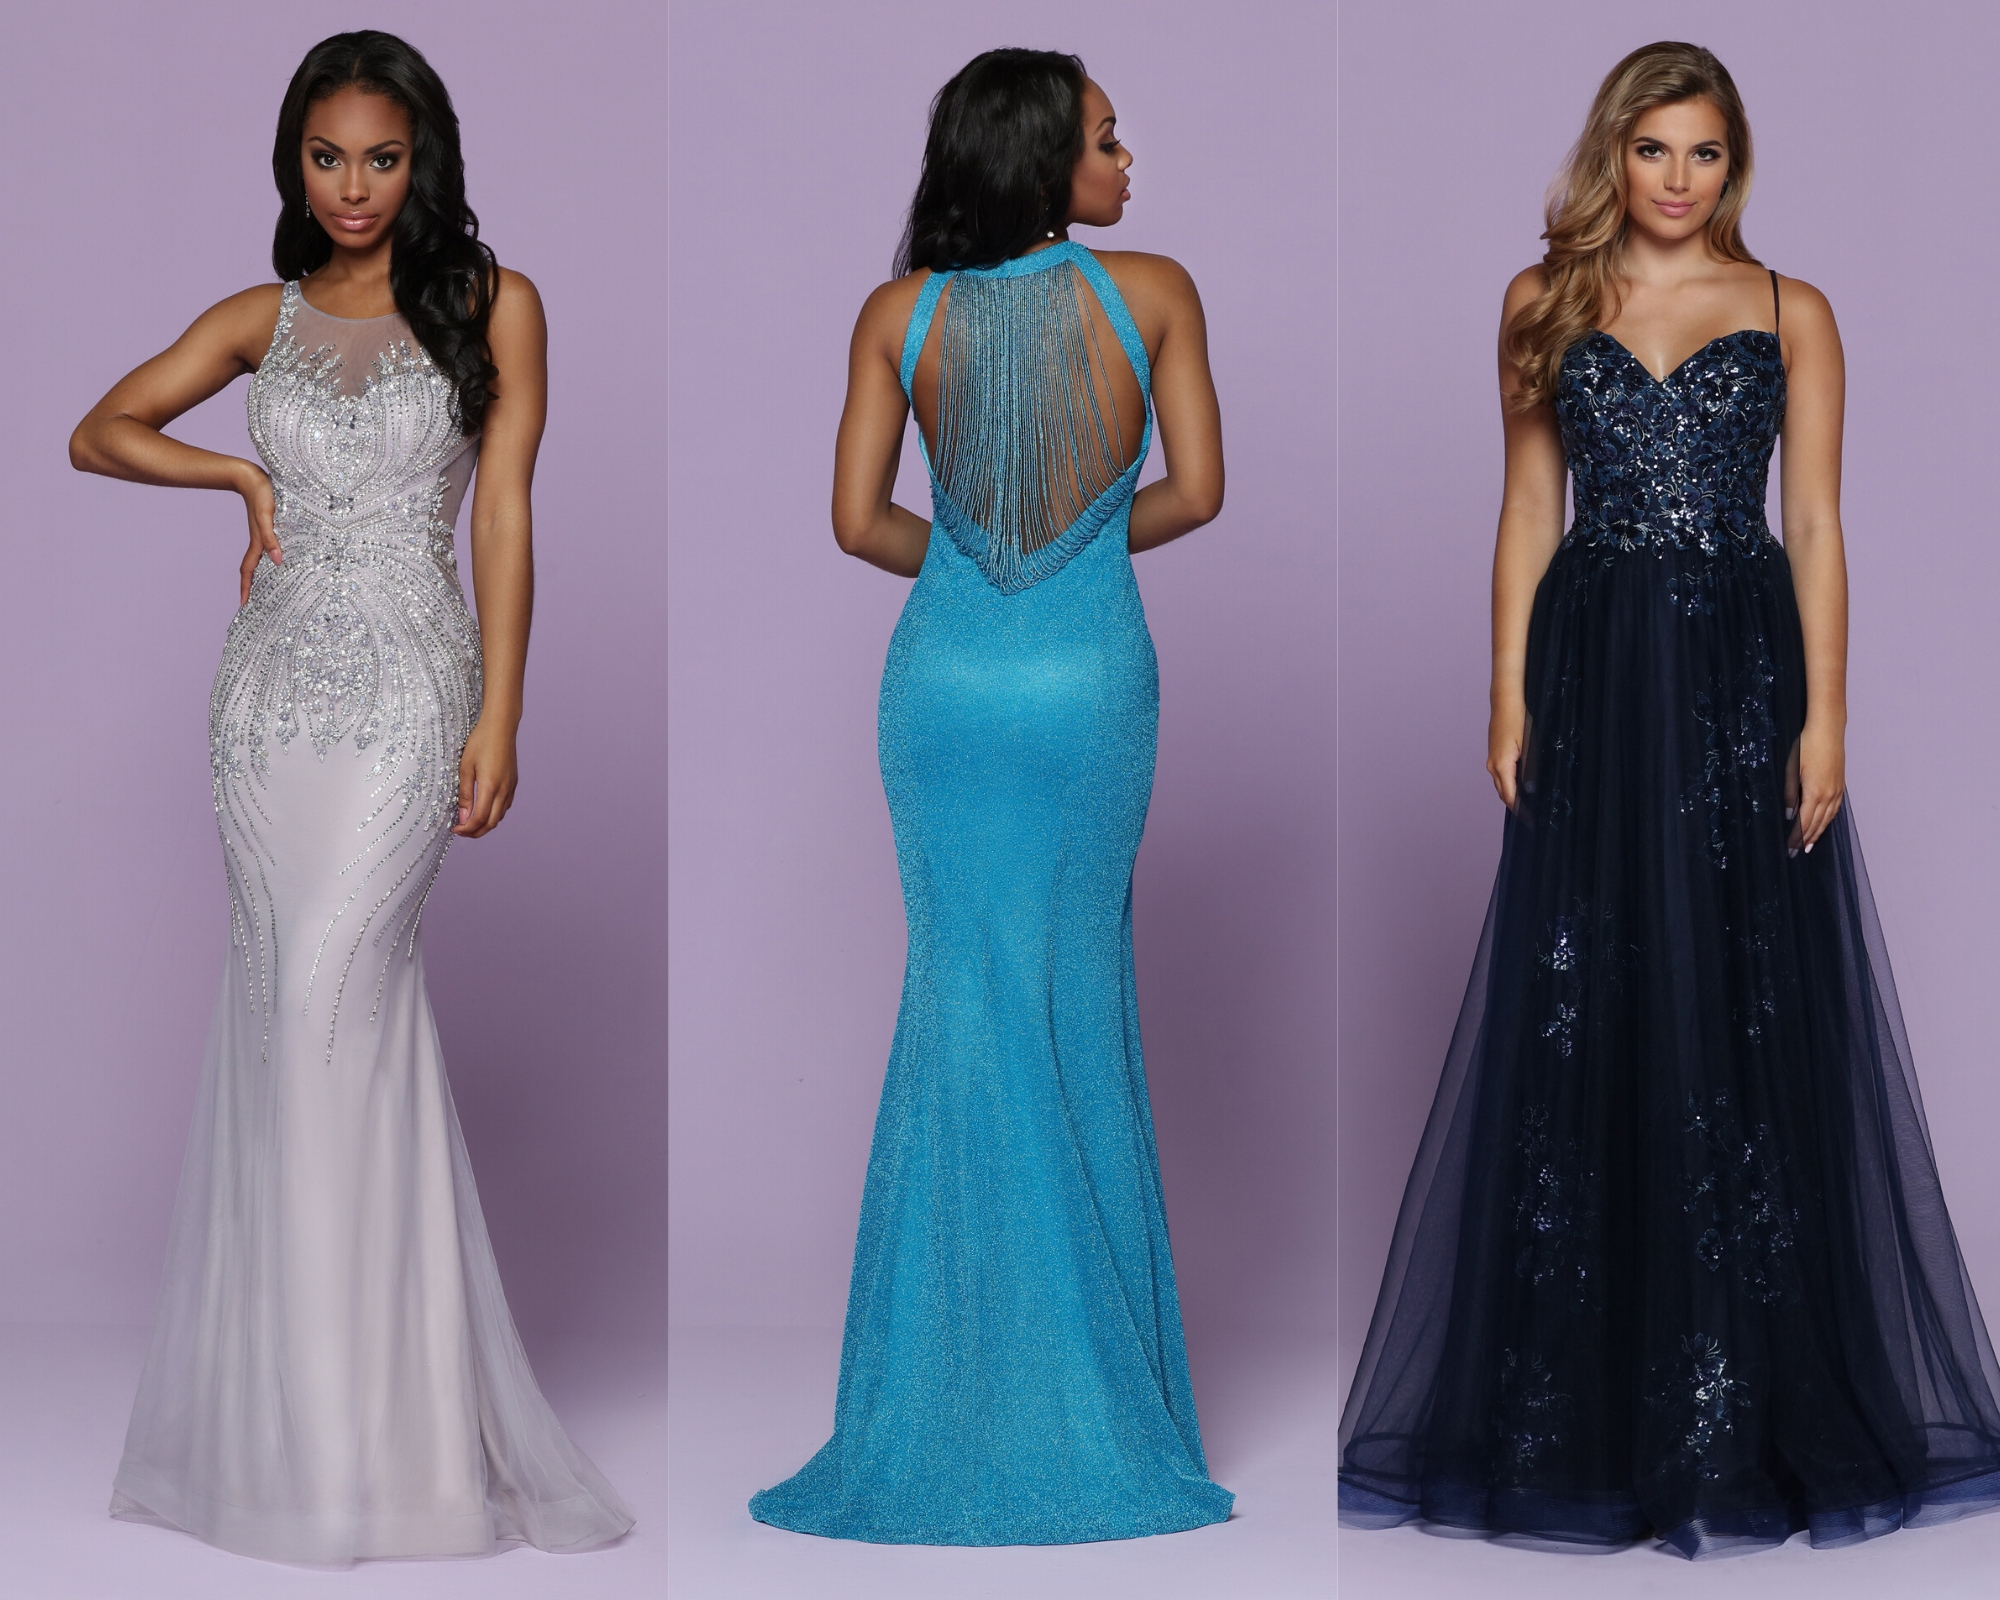 Most Unique & Chic Prom Dresses for 2021 – Sparkle Prom